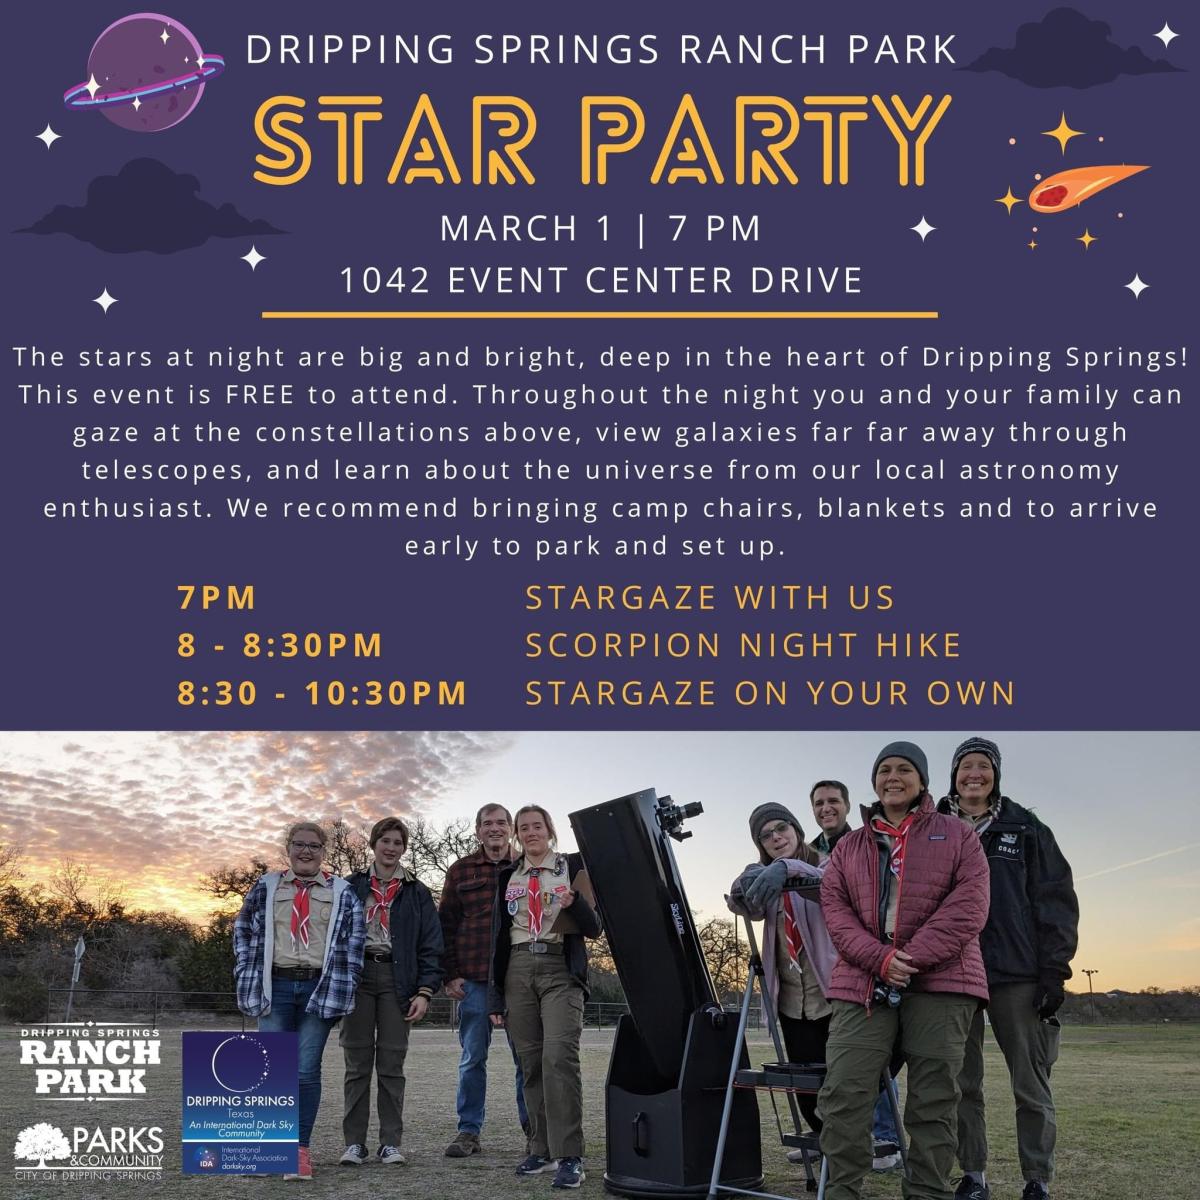 March 1st Star Party